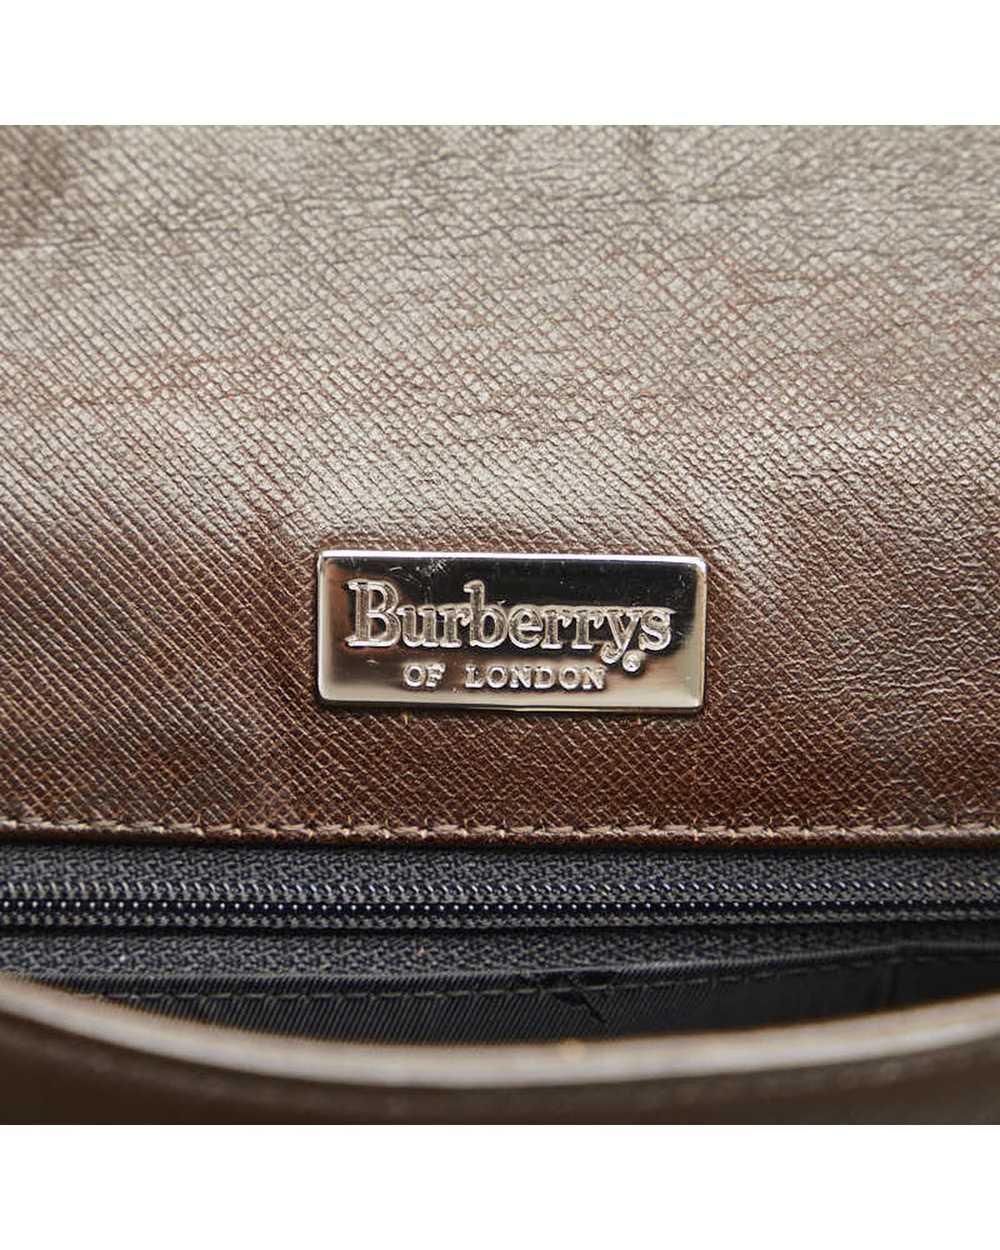 Burberry Brown Leather Shoulder Bag in AB Conditi… - image 7